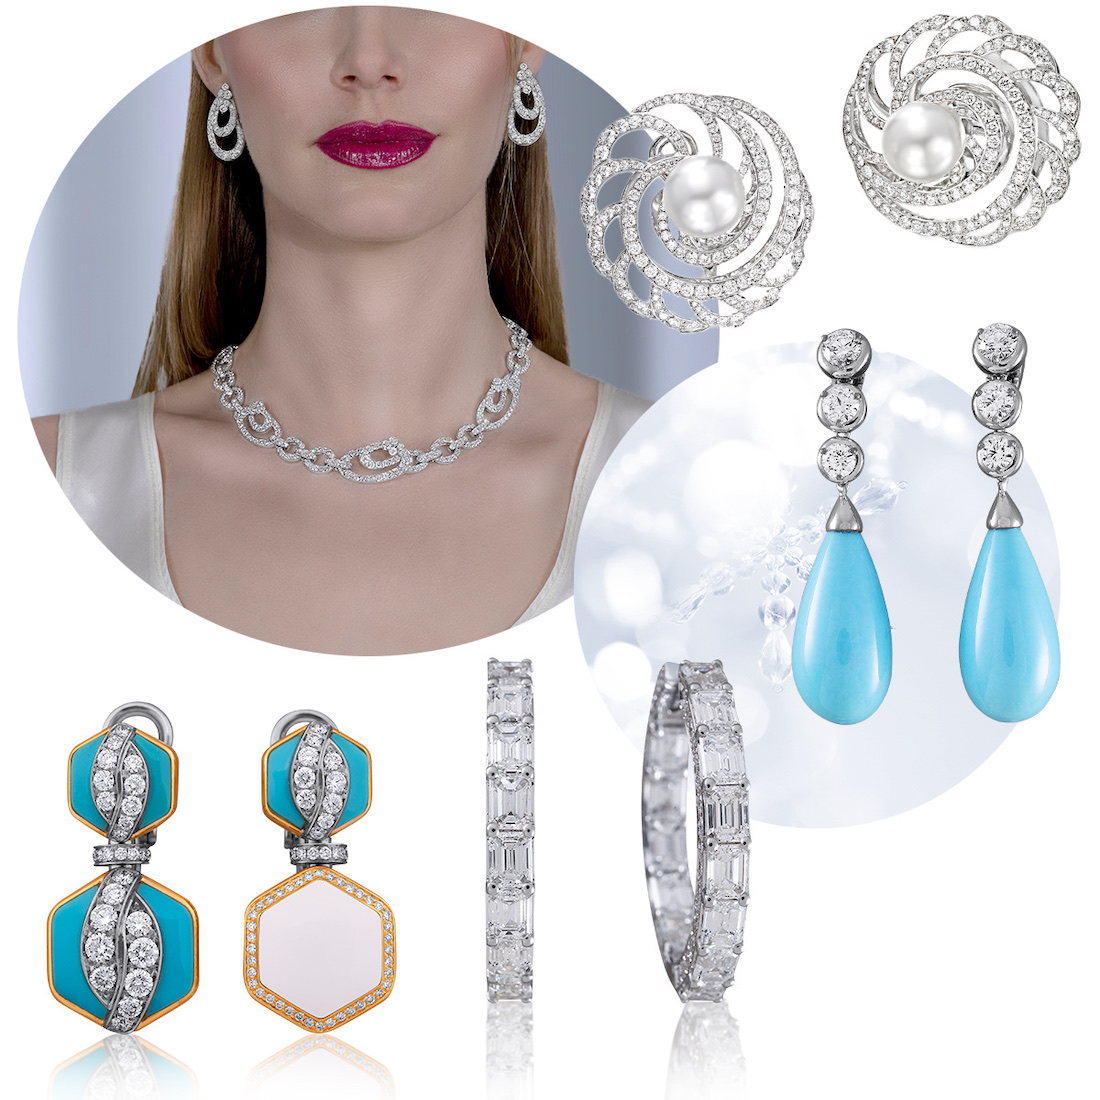 PICCHIOTTI Pearl and Diamond Hoop earrings, PICCHIOTTI Essentially Color Turquoise and Diamond drop earrings, PICCHIOTTI Classic Diamond Hoop earrings, PICCHIOTTI Reversible Xpandable Turquoise, White Ceramic, and Diamond earrings, model wearing PICCHIOTTI Swirl necklace and earrings 